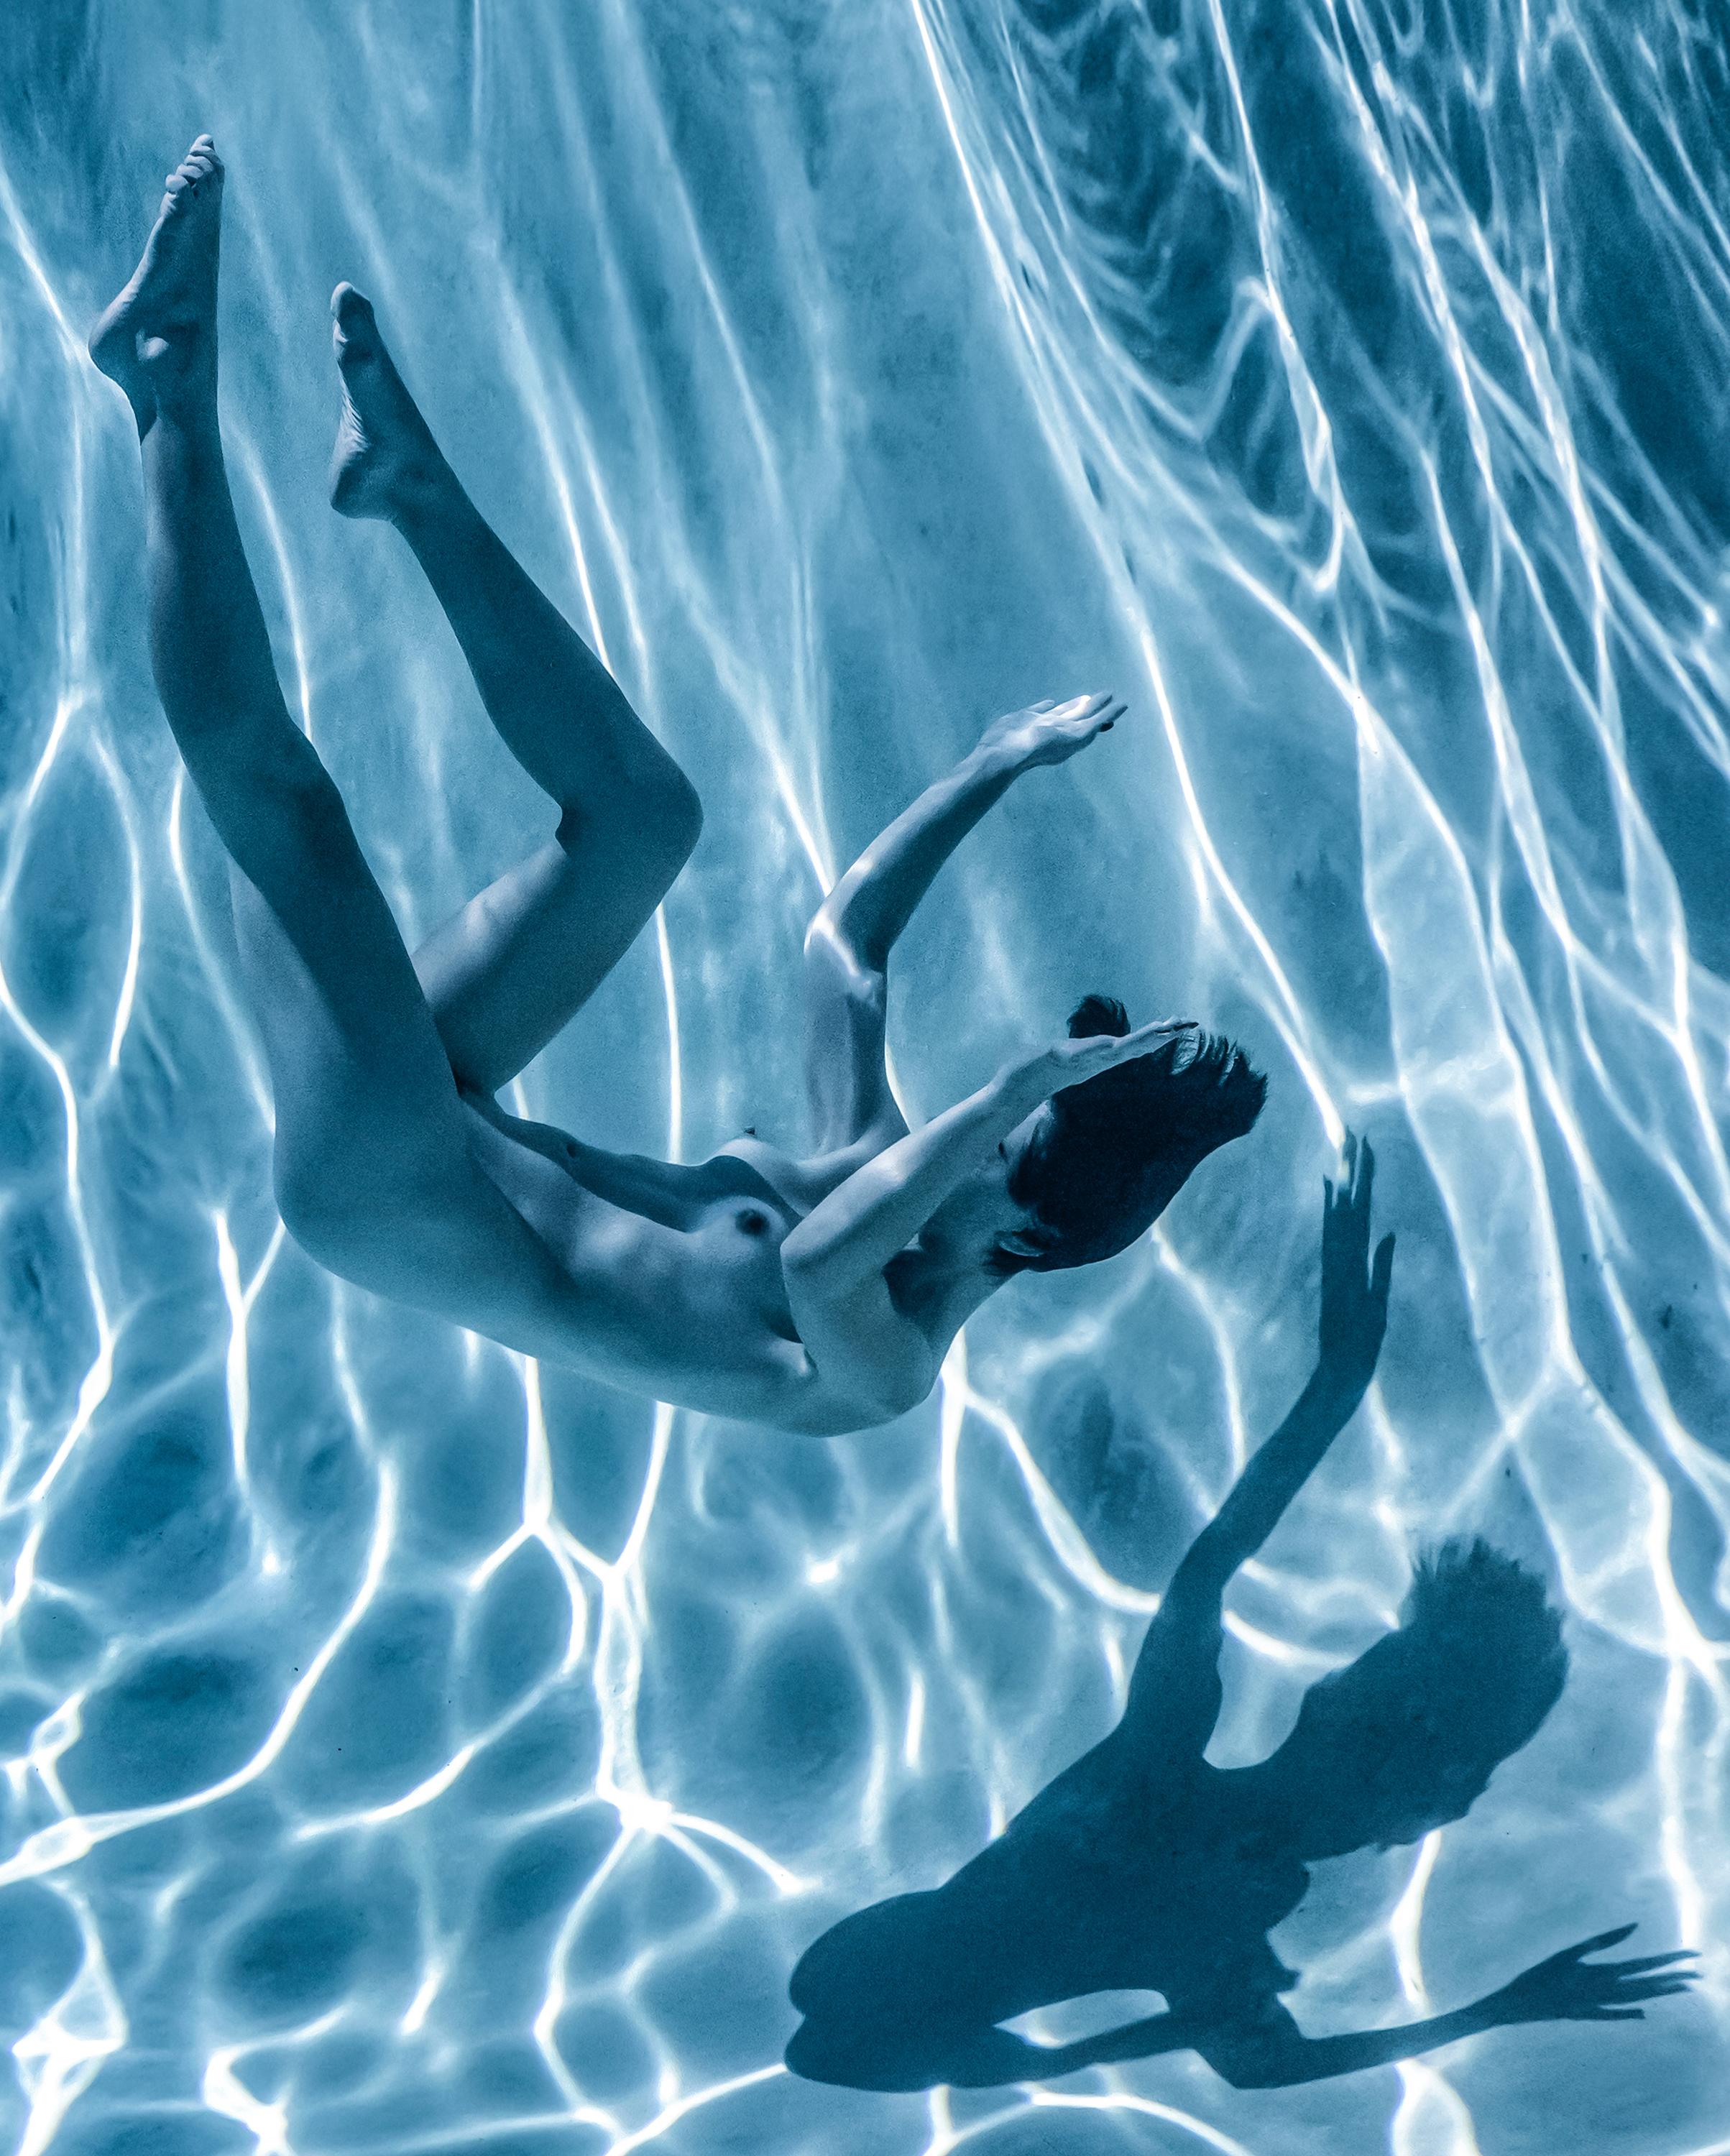 Marble Cave (blue triptych) - underwater nude photograph - 3 prints 35